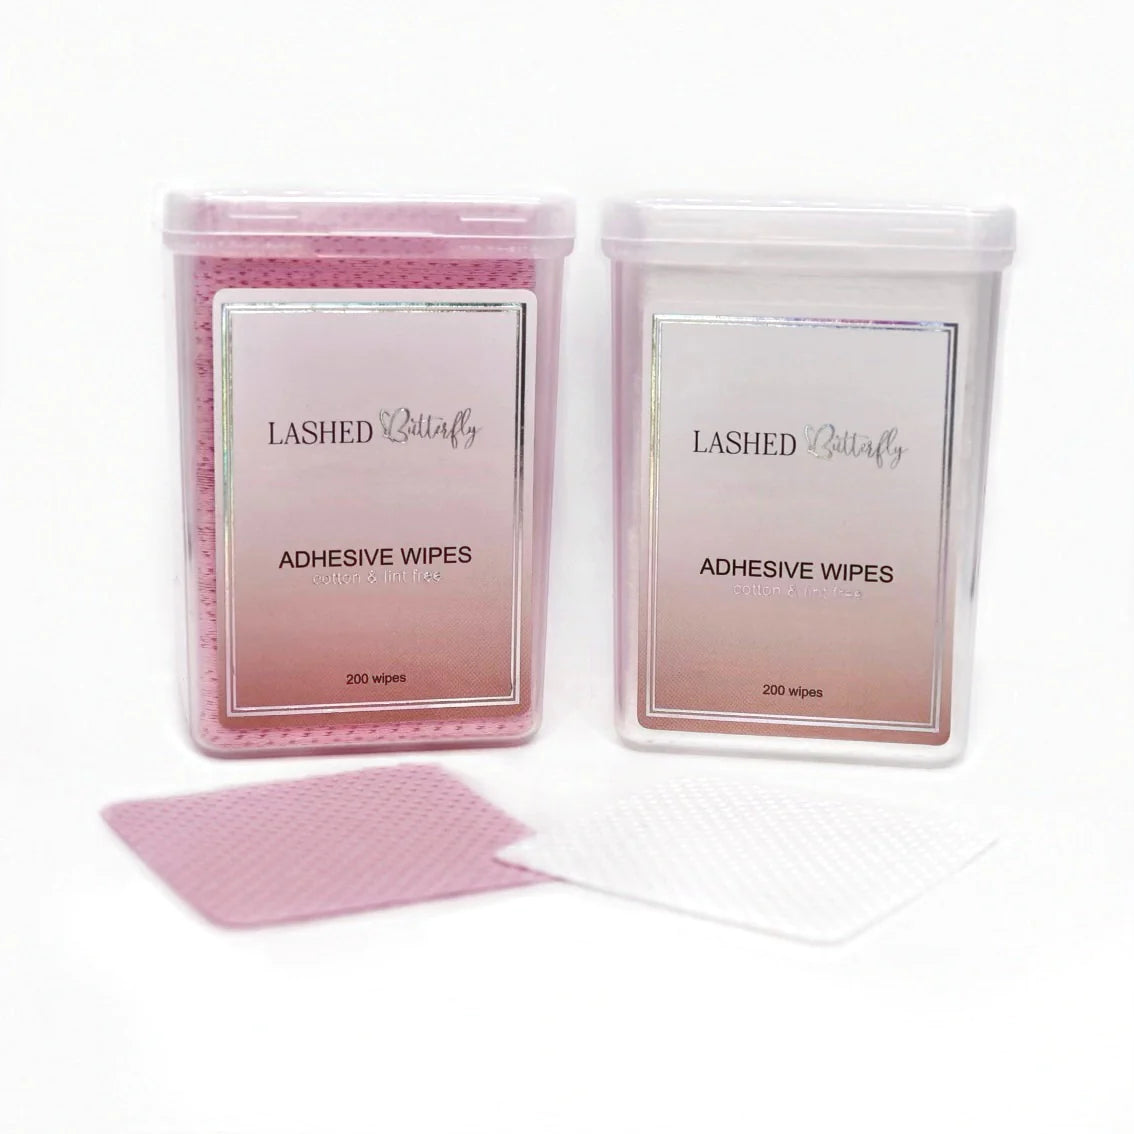 Lashed Butterfly Adhesive Wipes